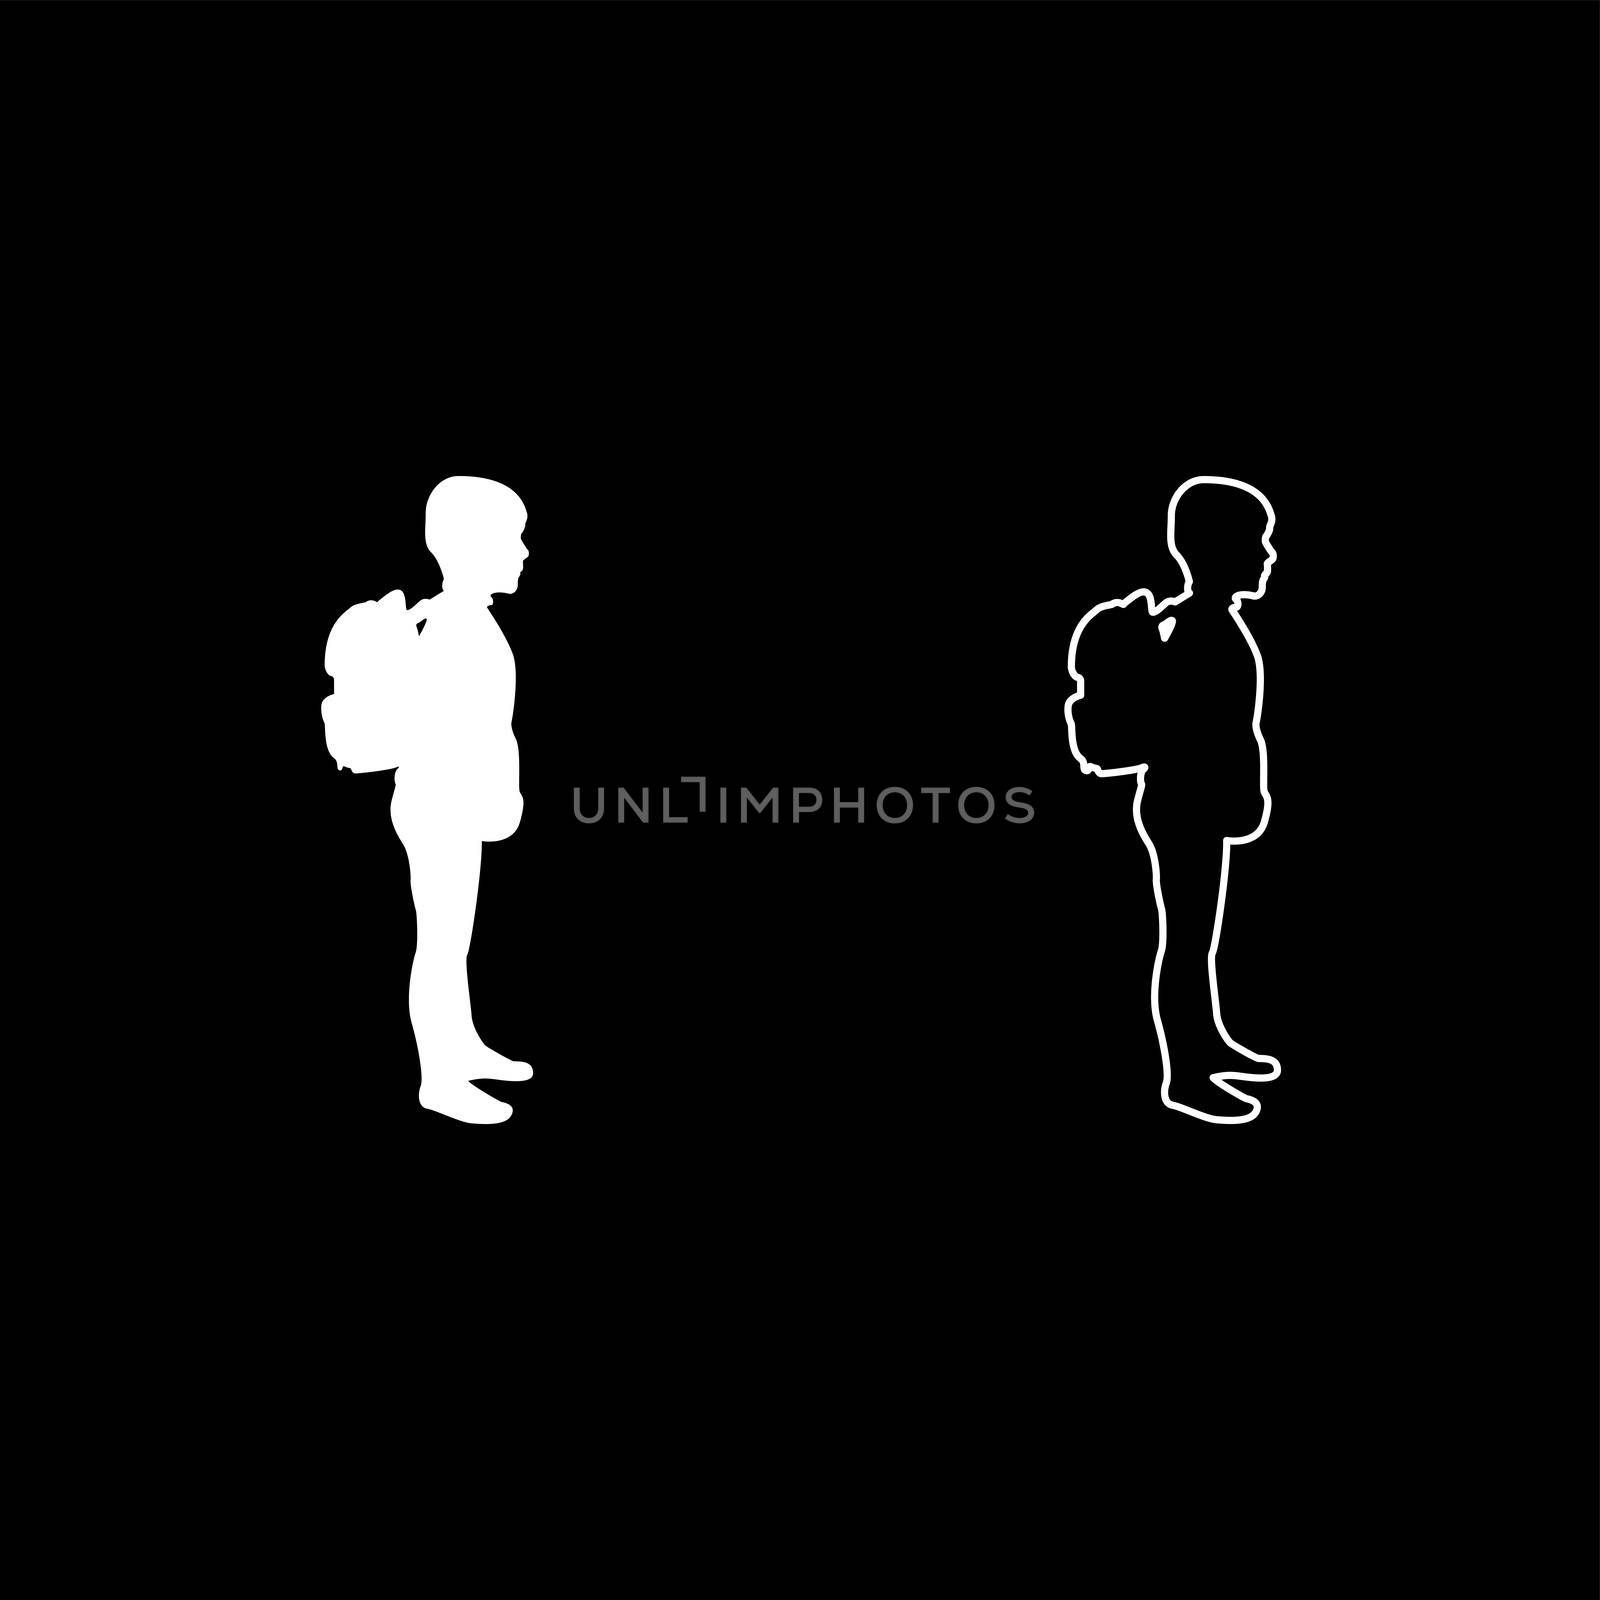 Schoolboy with backpack Pupil stand carrying on back Going to school concept Come back to school idea education Preschooler rucksack first September start lessons knapsack Side view silhouette white color vector illustration solid outline style simple image